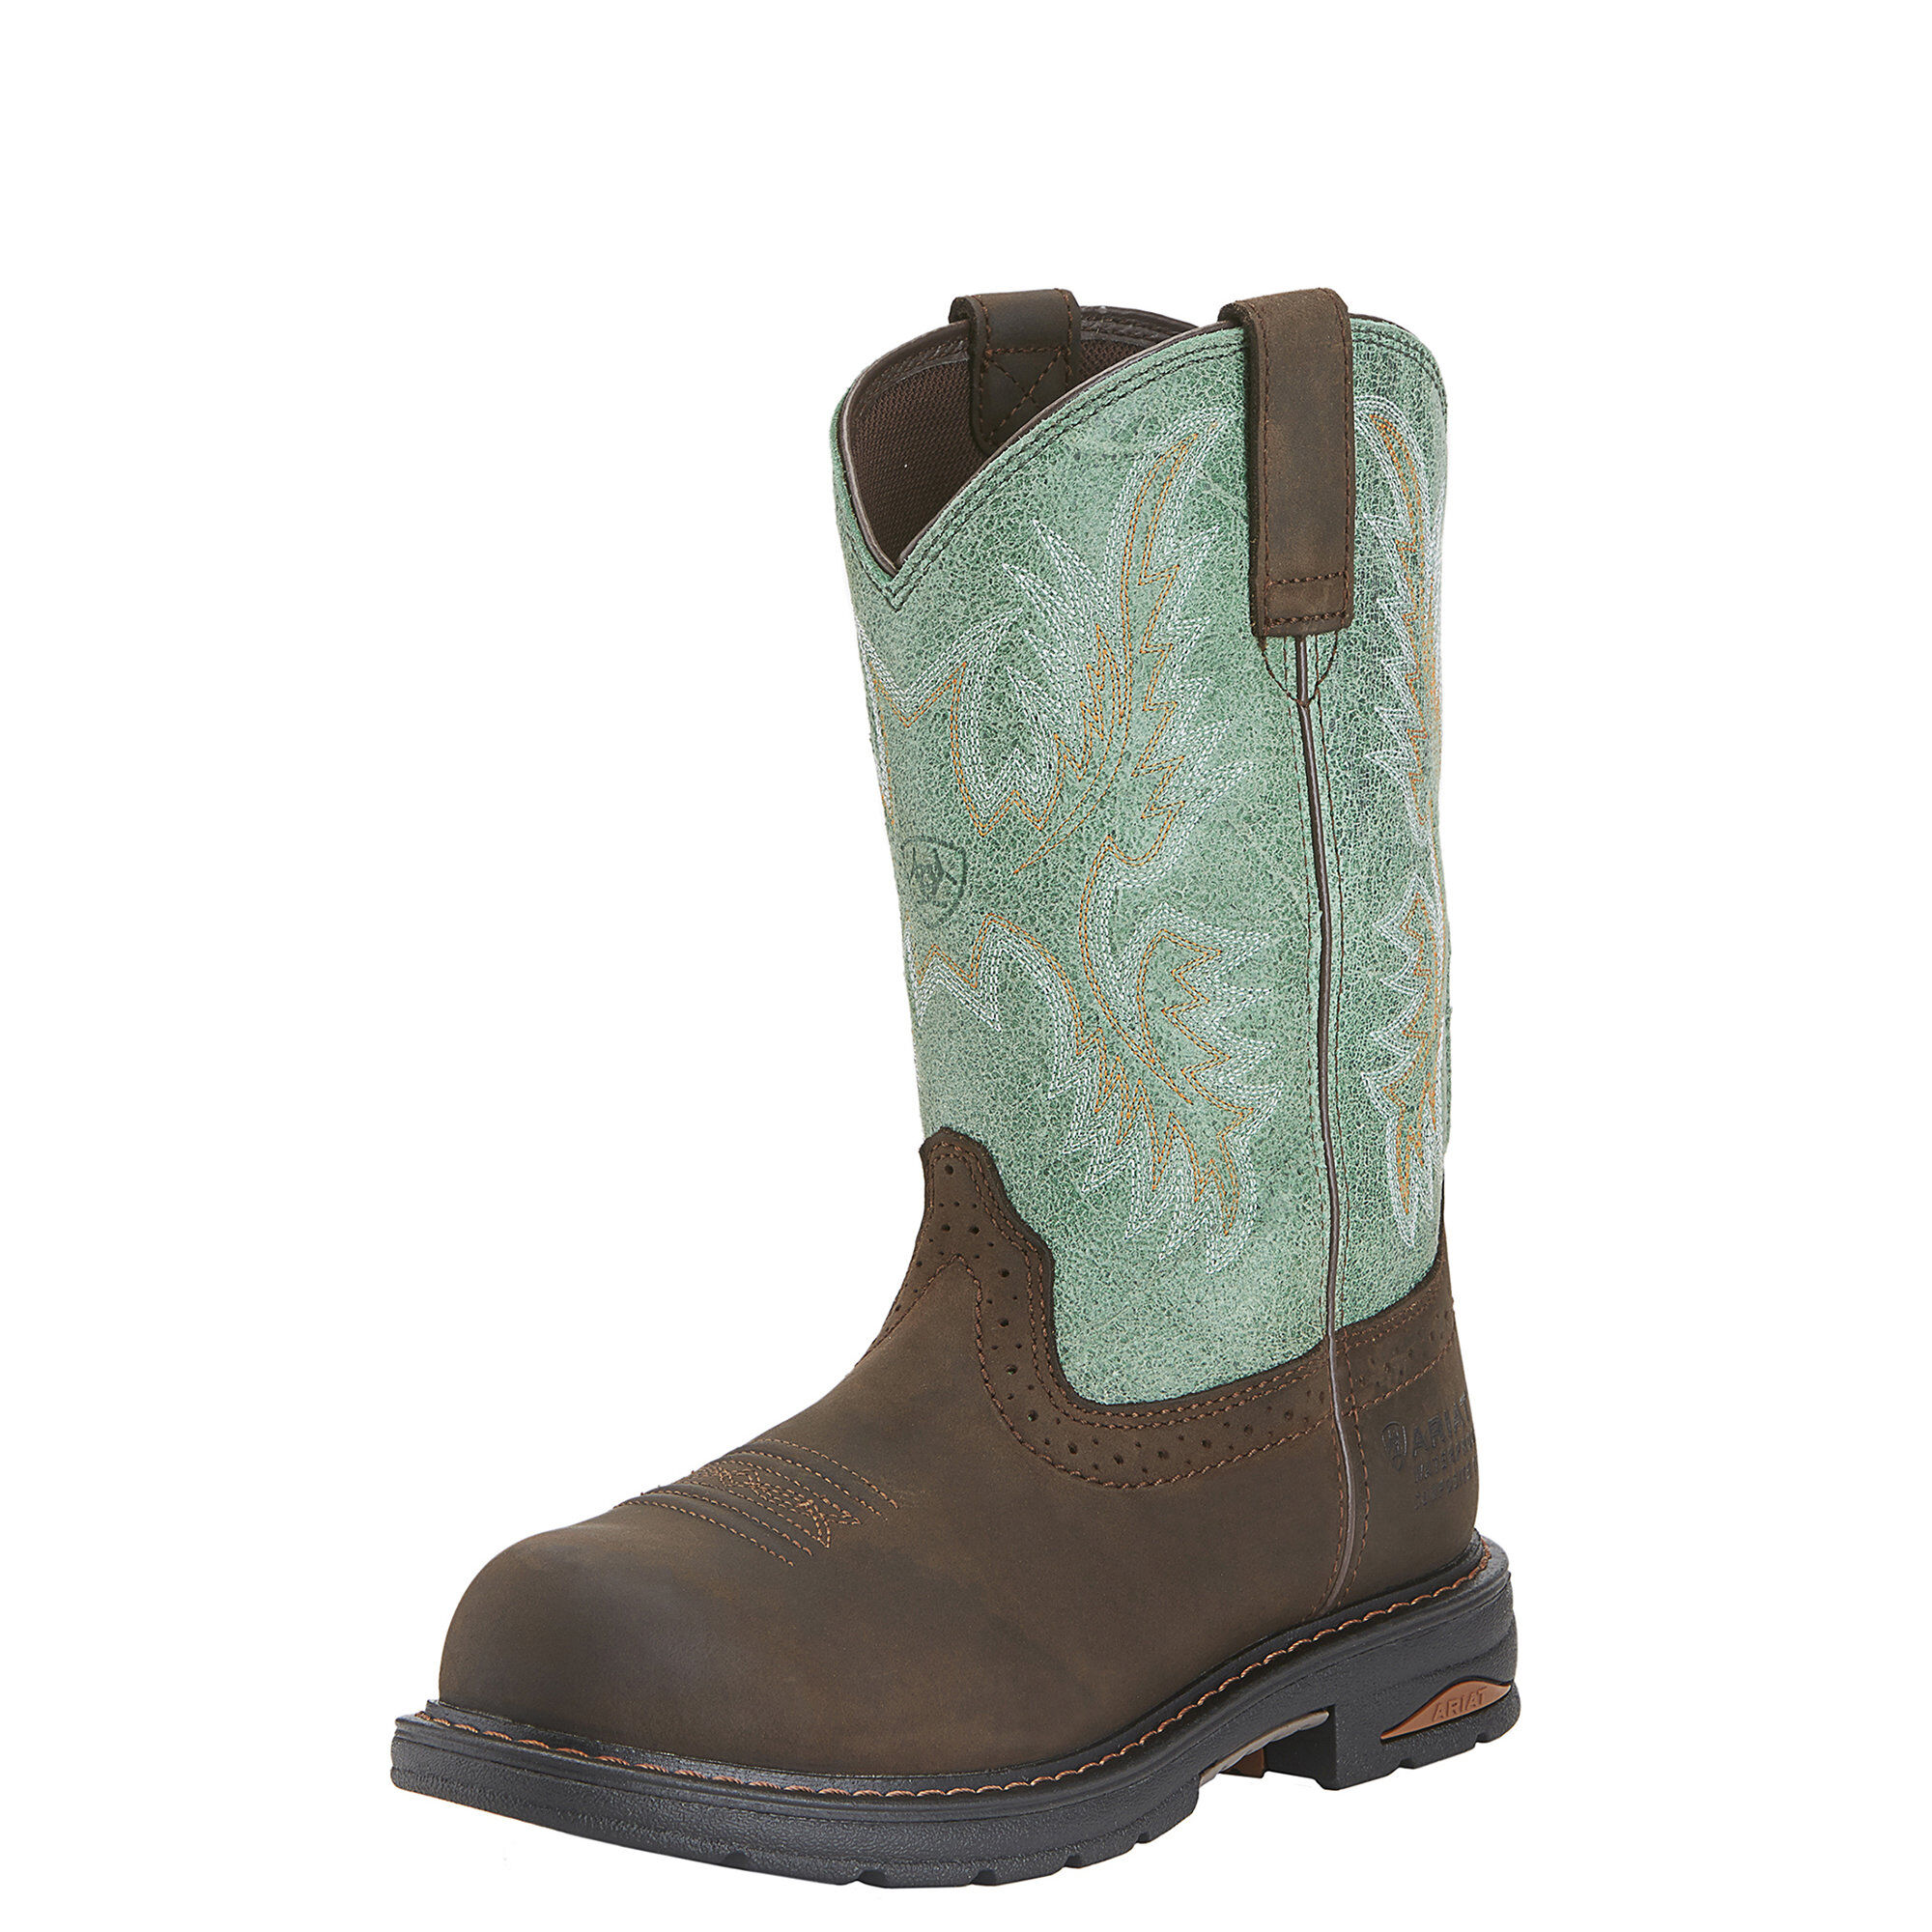 Women's Tracey Waterproof Composite Toe Work Boots in Oily Distressed Brown Leather  by Ariat